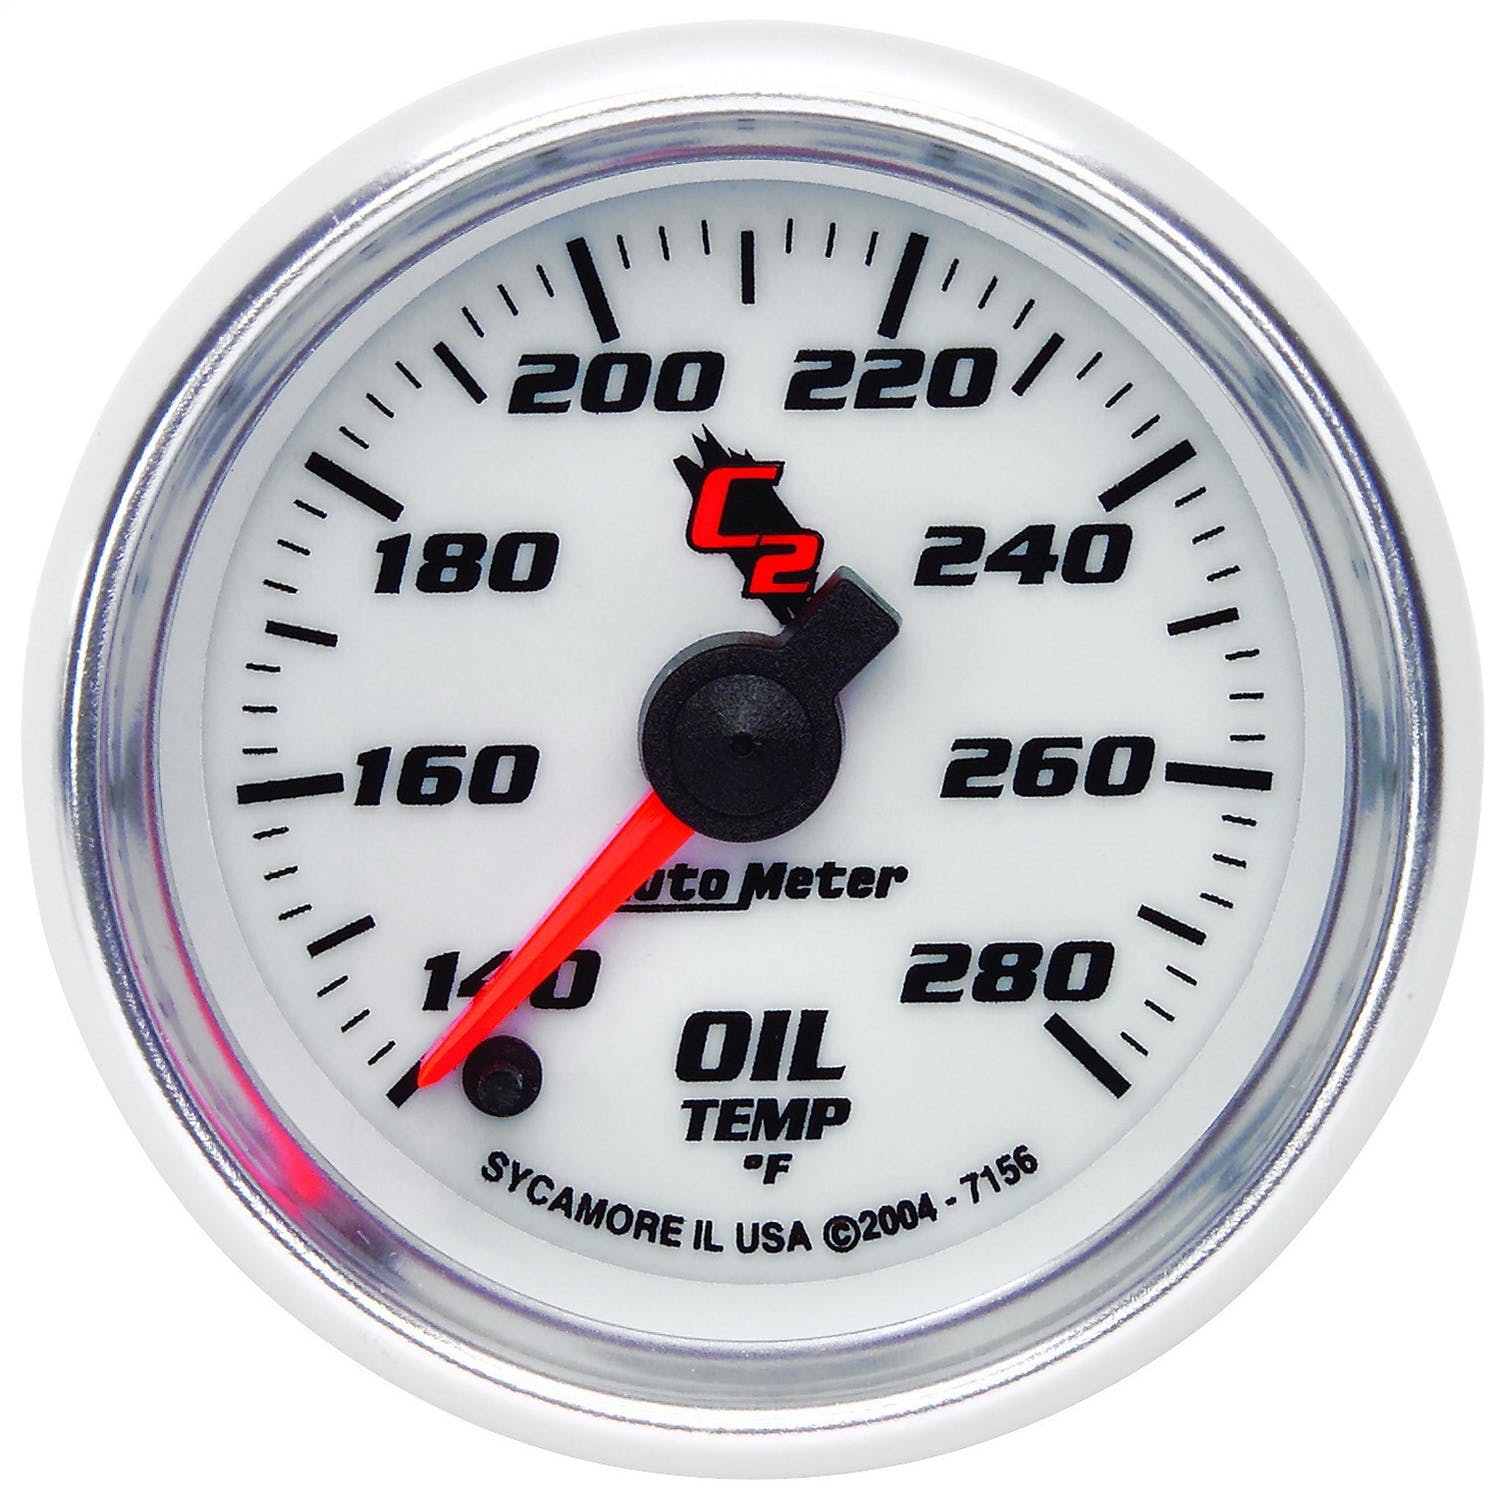 AutoMeter Products 7156 Oil Temp 140-280 F